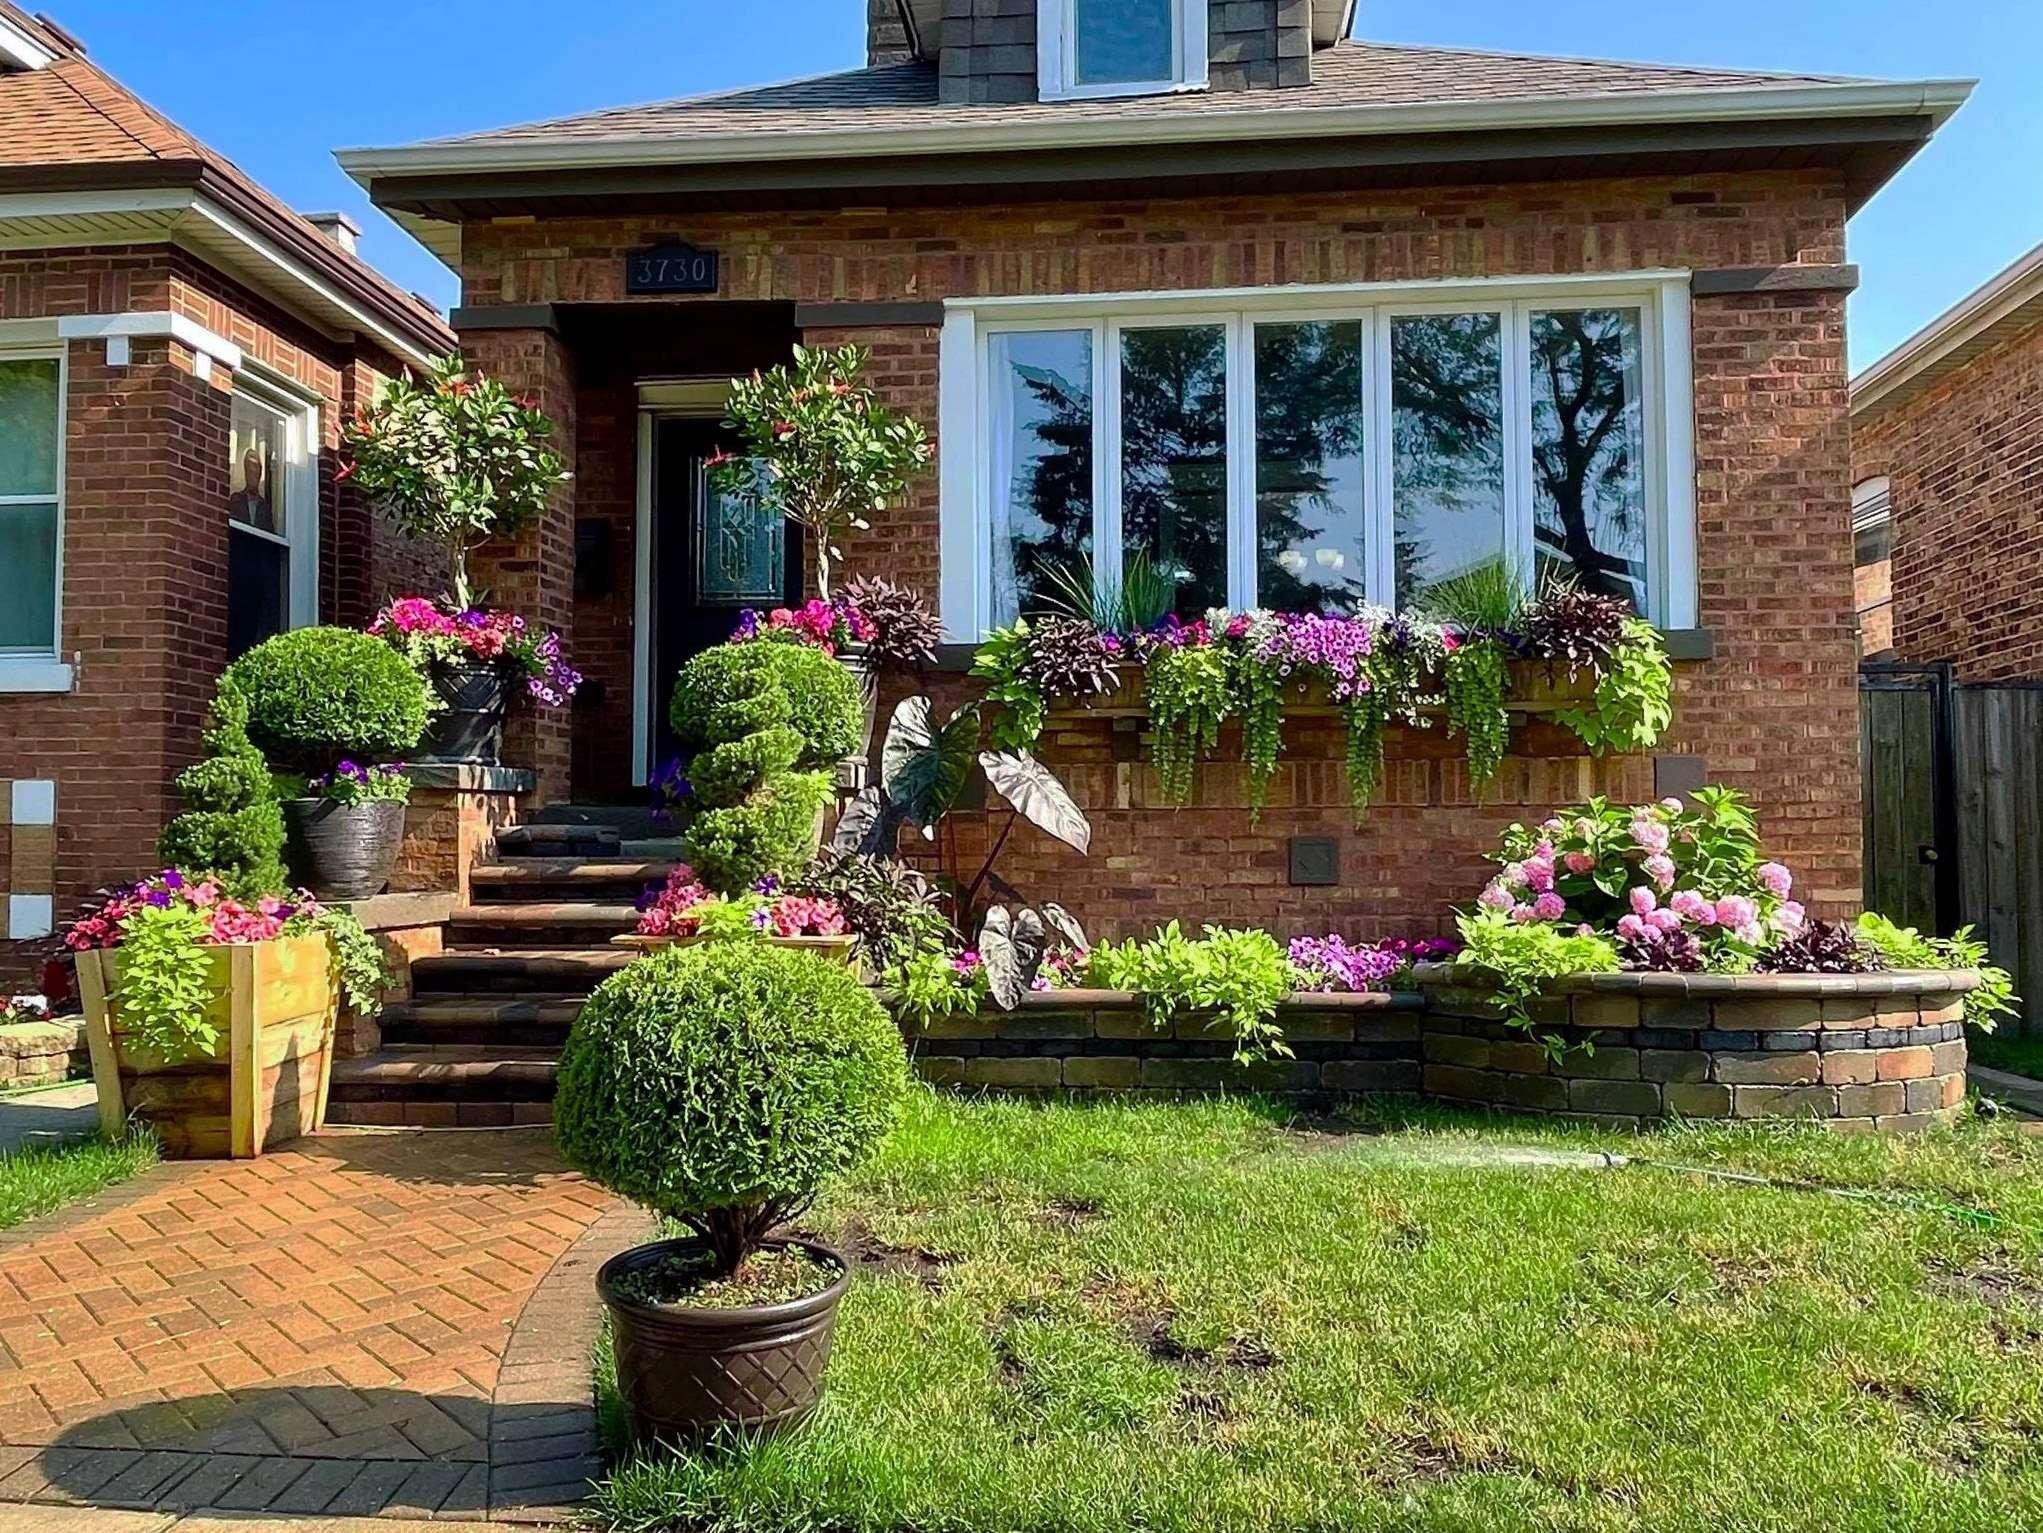 West Lawn residents Mitzi and Gilberto Cantu won the window/planter box category in the Chicago Bungalow Association’s 2021 garden contest. (Chicago Bungalow Association)